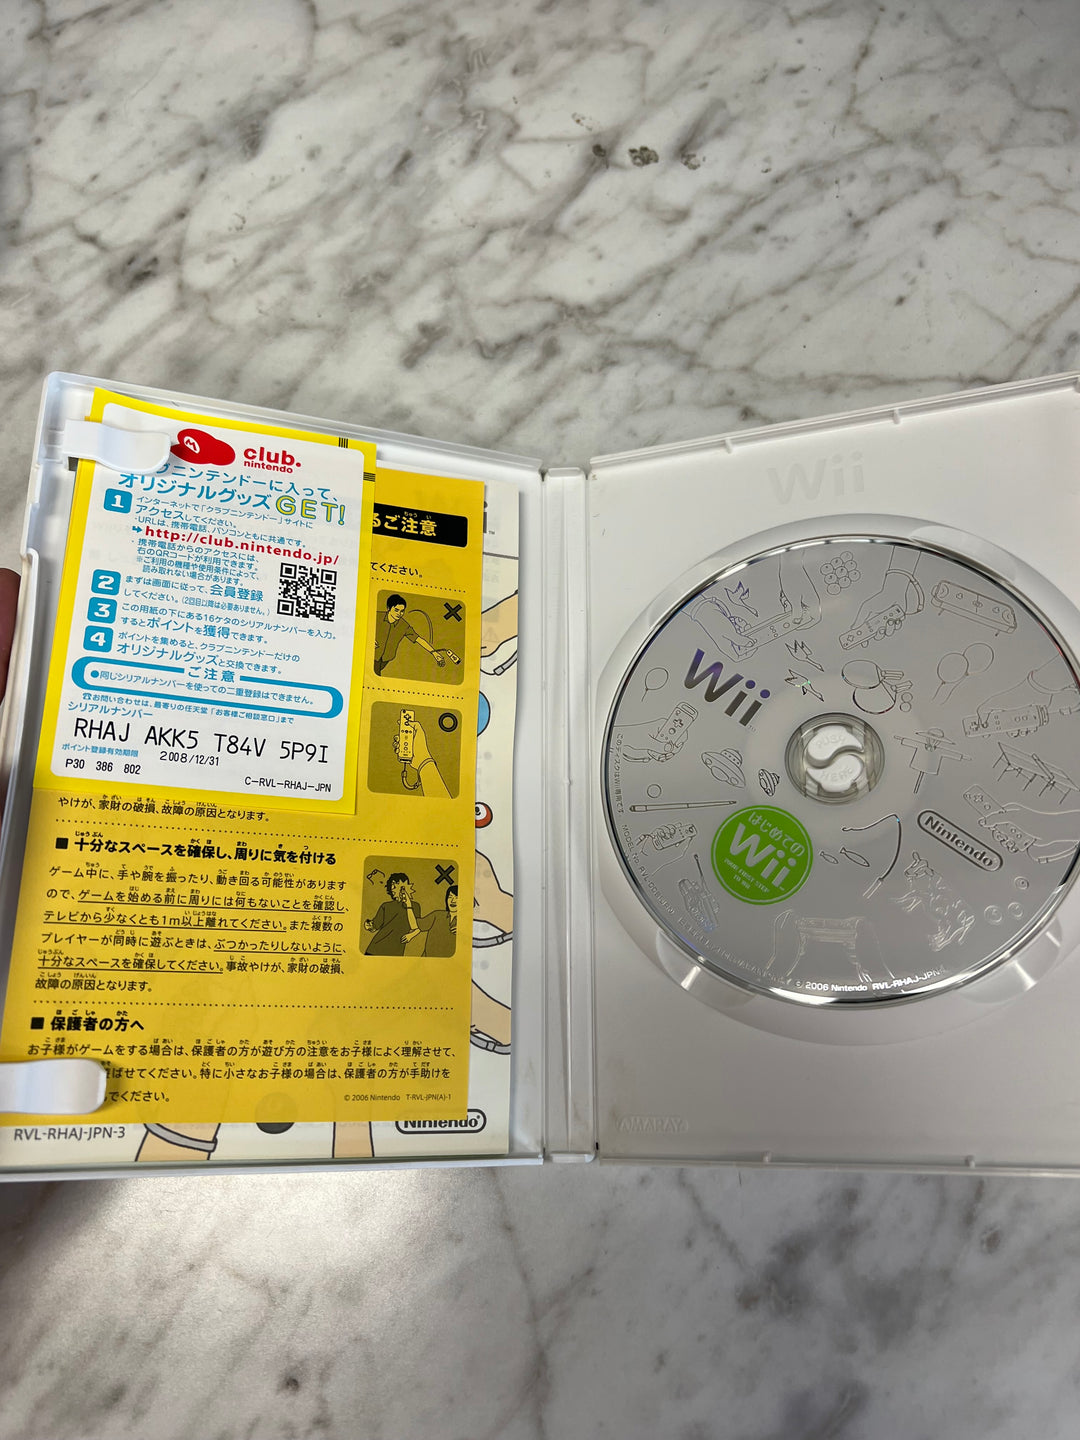 Hajimete no Wii Play Your First Step to Wii WII Nintendo Import Japan  D70124